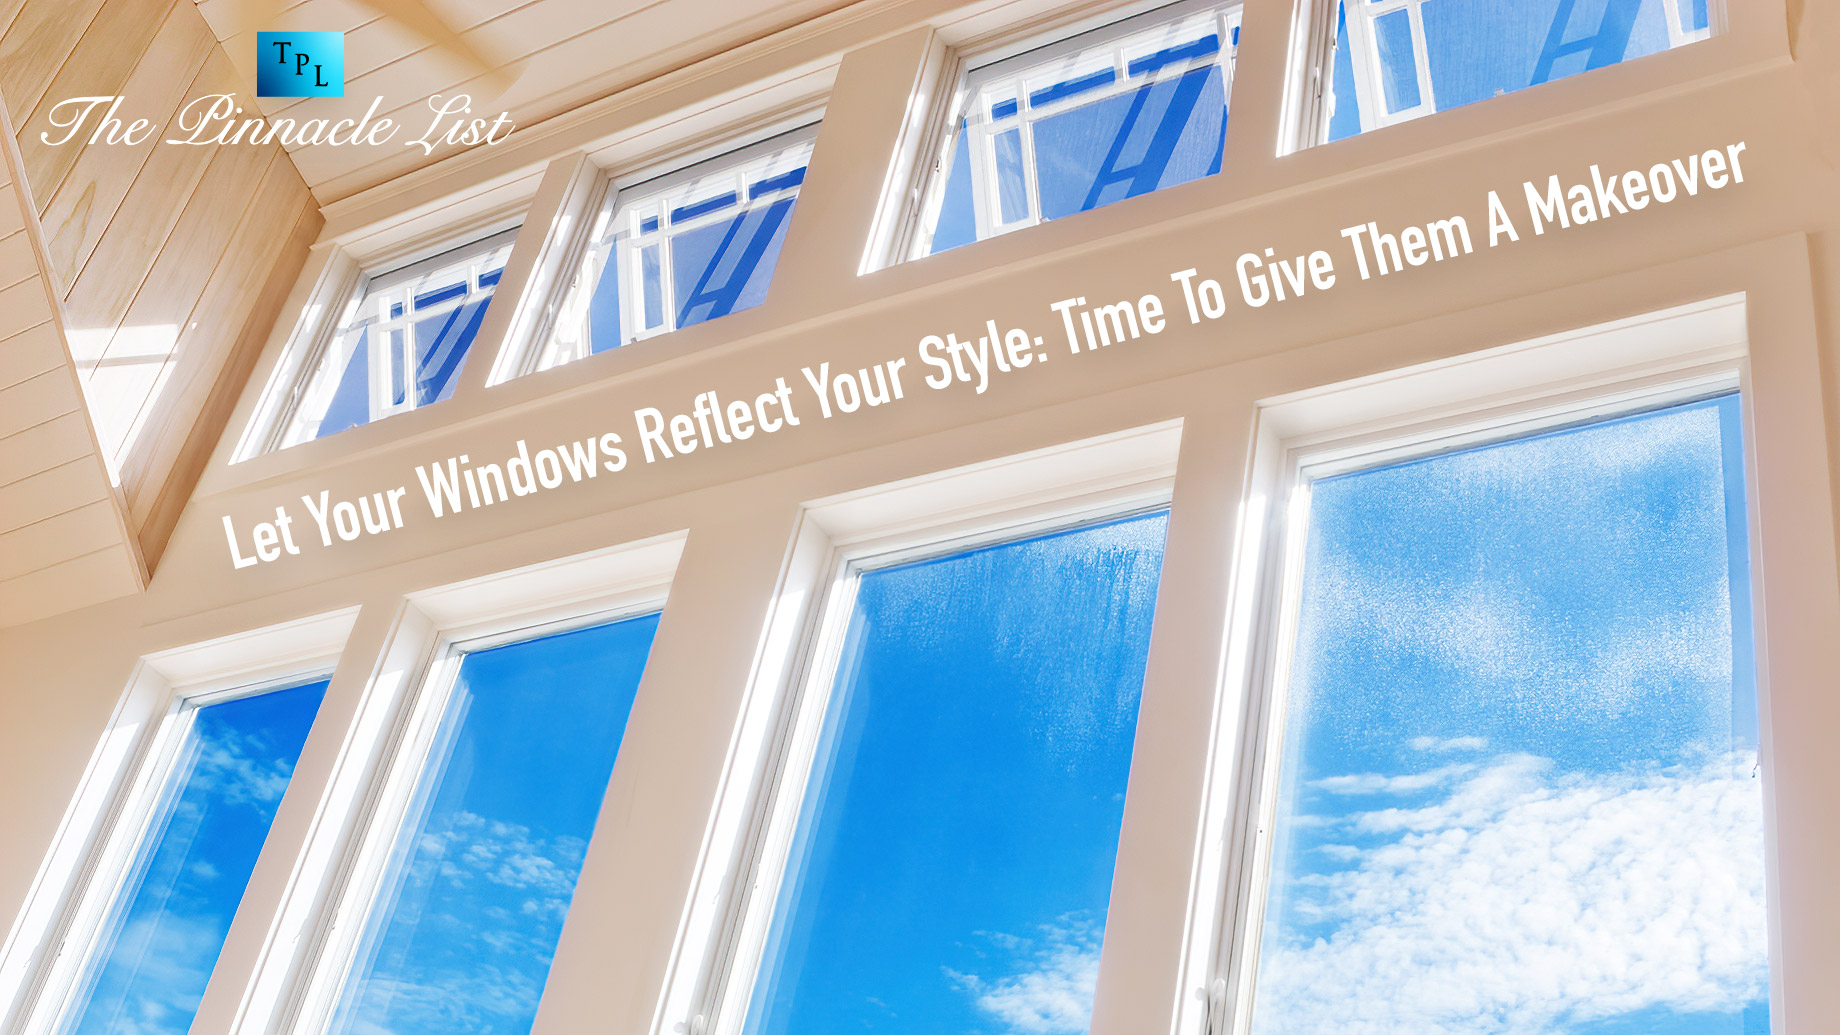 Let Your Windows Reflect Your Style - Time To Give Them A Makeover